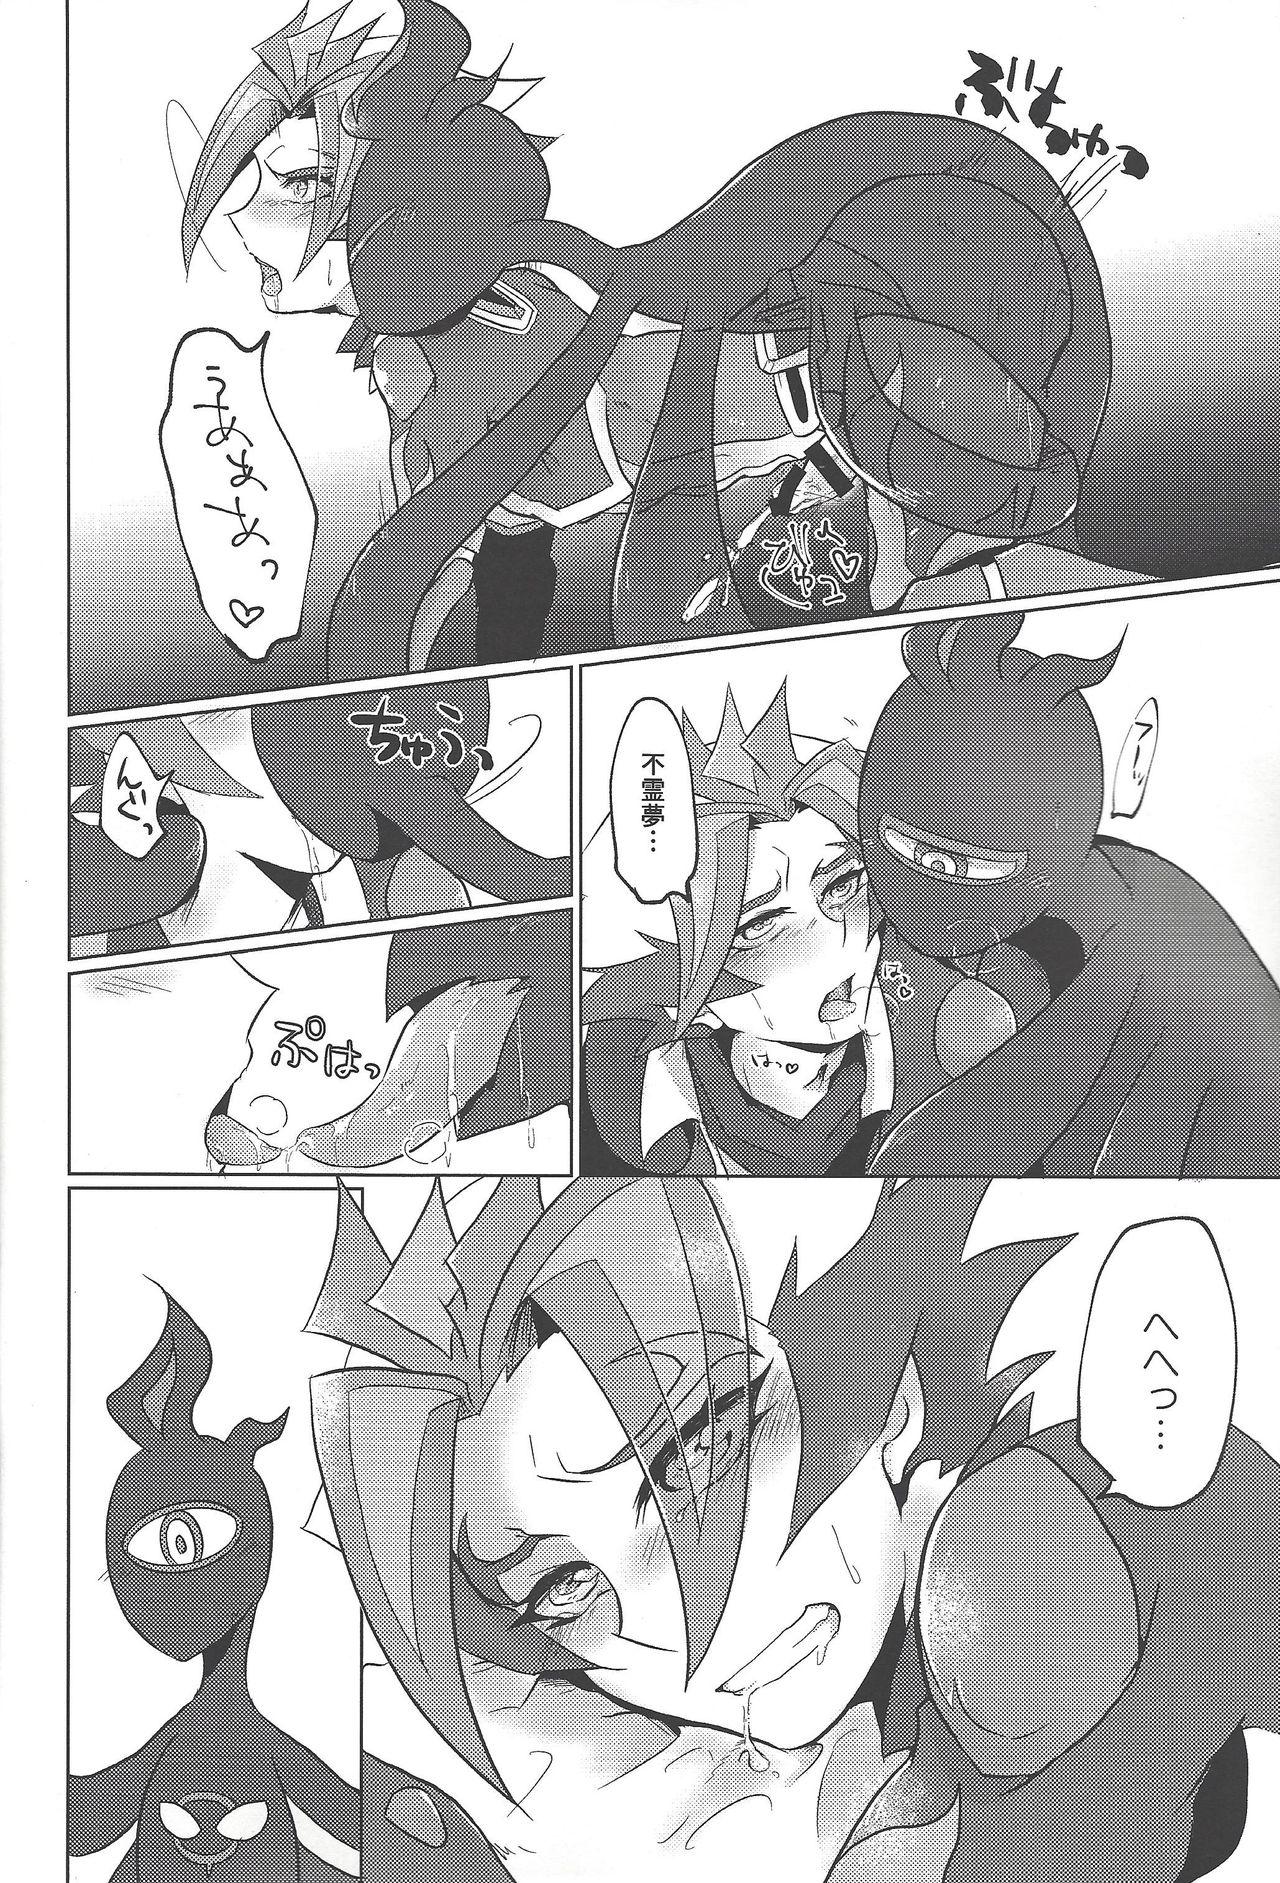 Fist Re:FRAMING - Yu-gi-oh vrains Dominatrix - Page 3